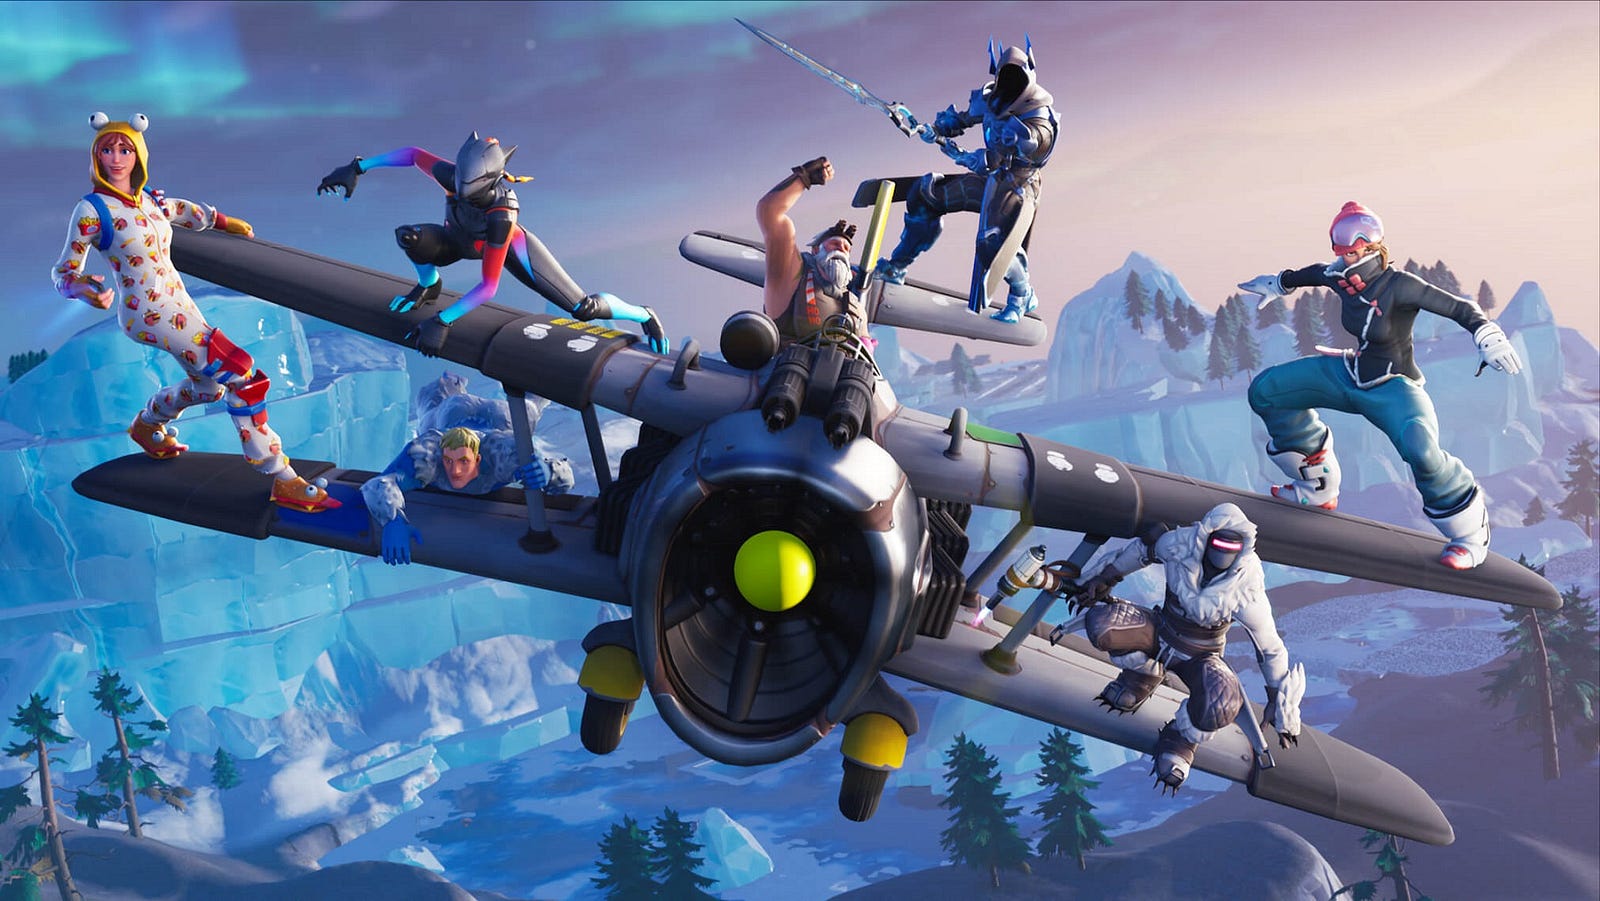 What We Can Learn From The Fortnite 2fa Rollout Zach Hughes Medium - i was having lunch with my family this past sunday afternoon out of nowhere my two oldest sons caleb 13 and nathan 11 asked !   dad can we have 2fa